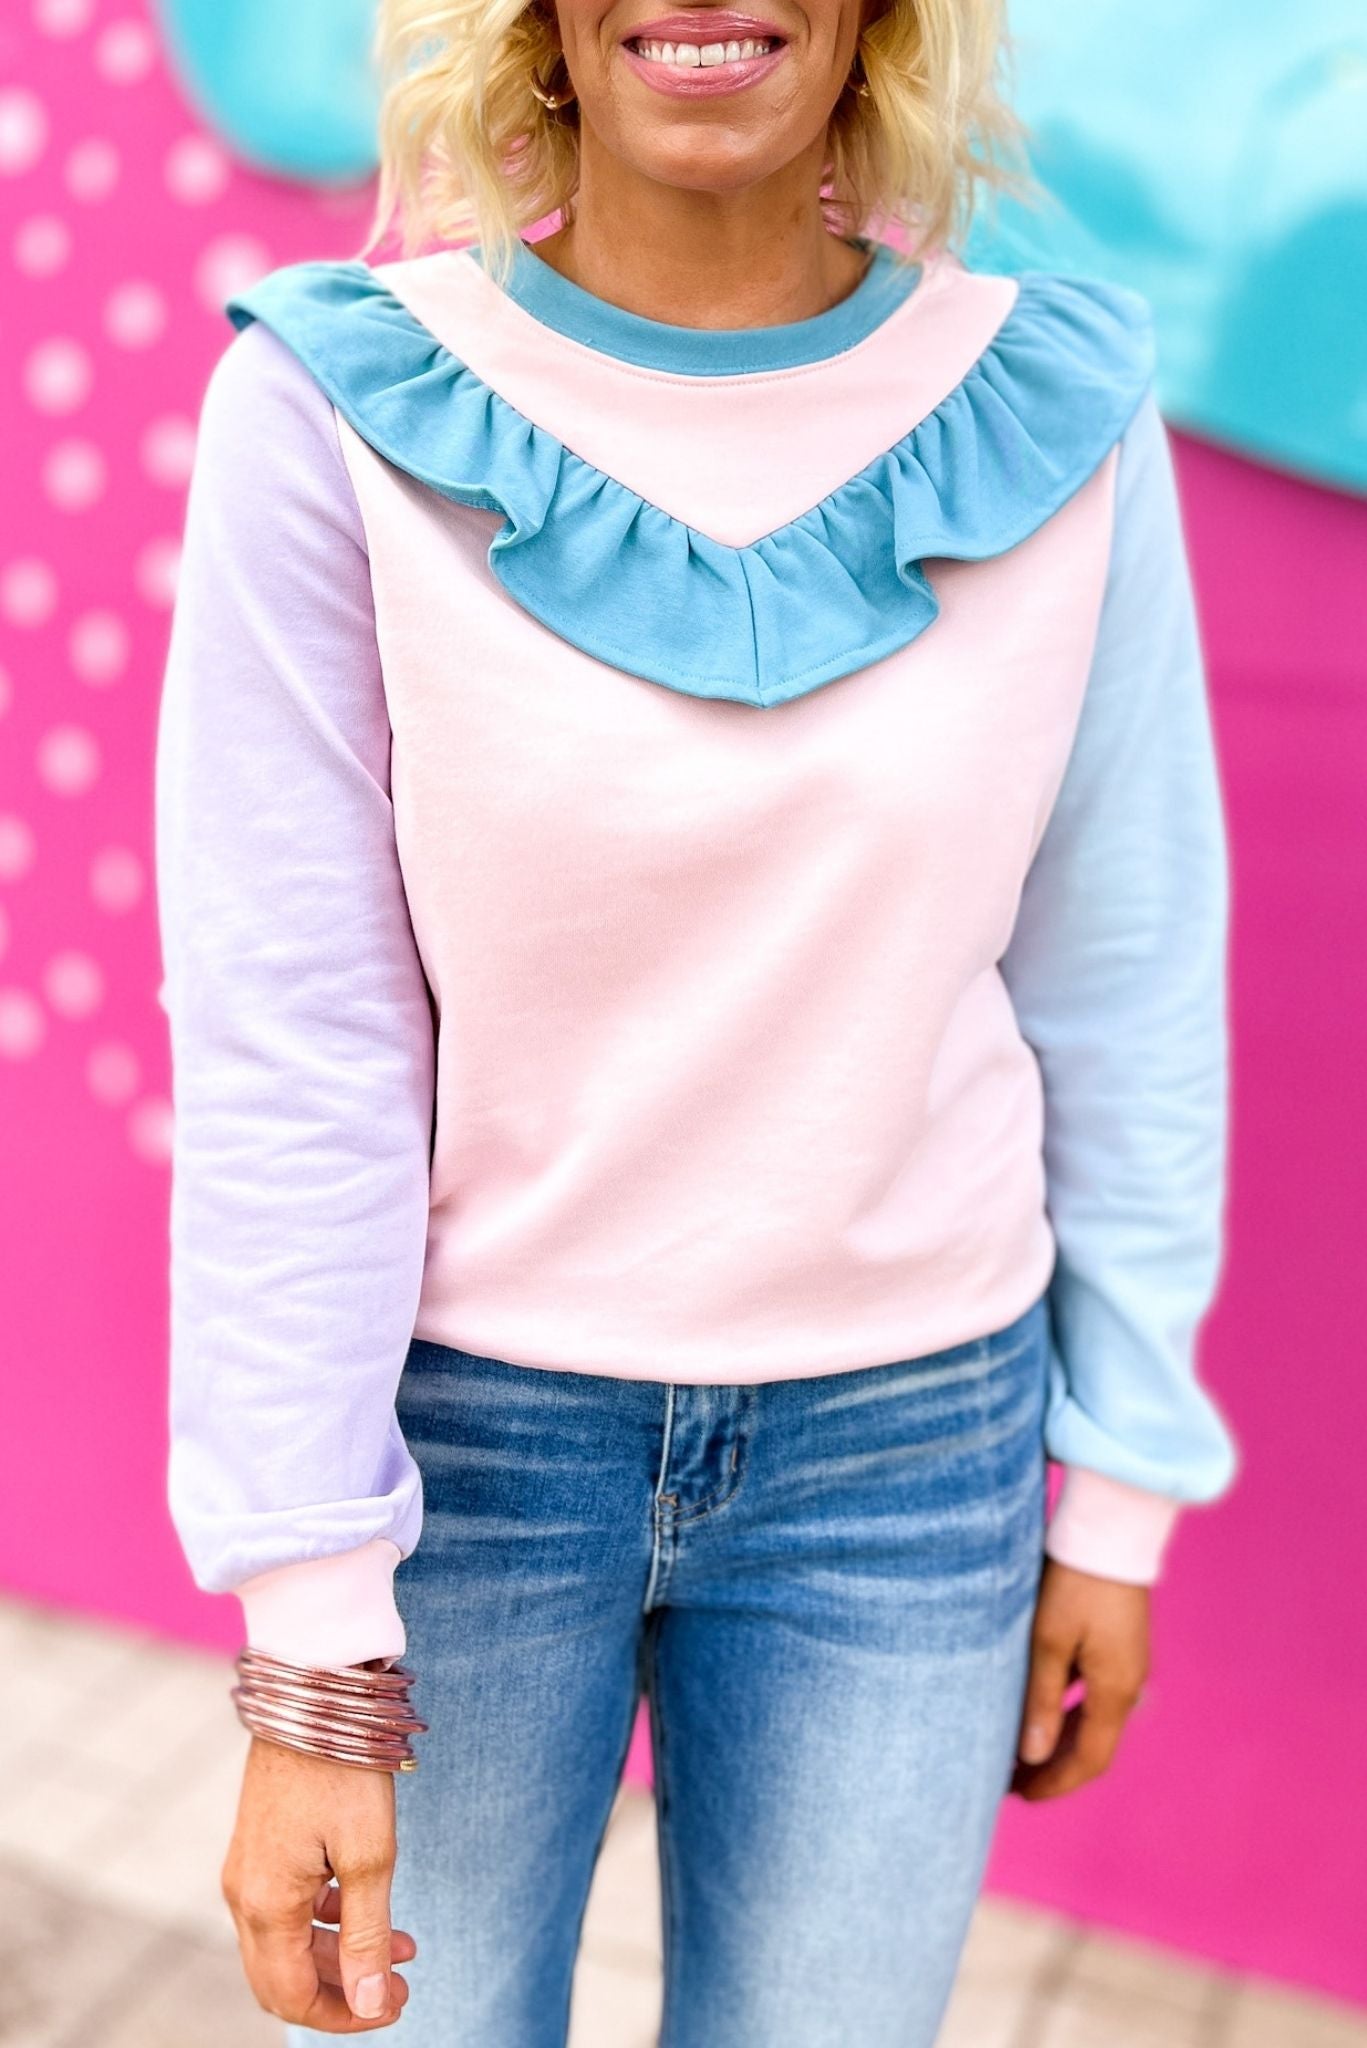 Load image into Gallery viewer, Pink Blue Colorblock Ruffle Sweater by Karlie, everyday glam, must have, mom style, chic, shop style your senses by mallory fitzsimmons
